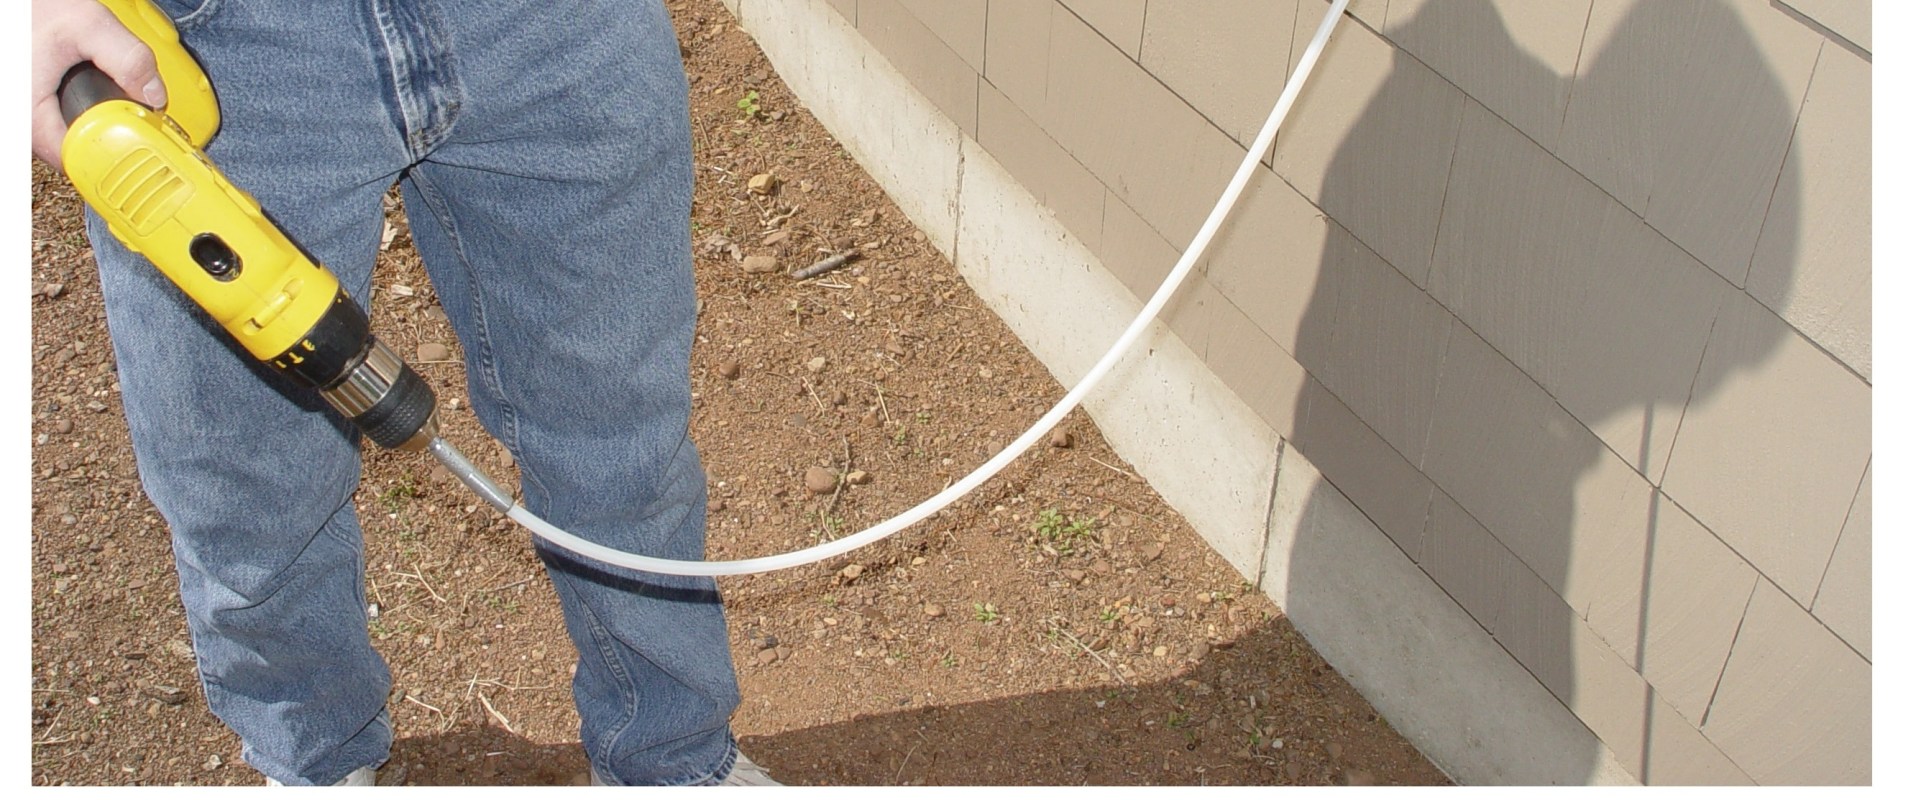 What Equipment Do Professional Dryer Vent Cleaners Use?